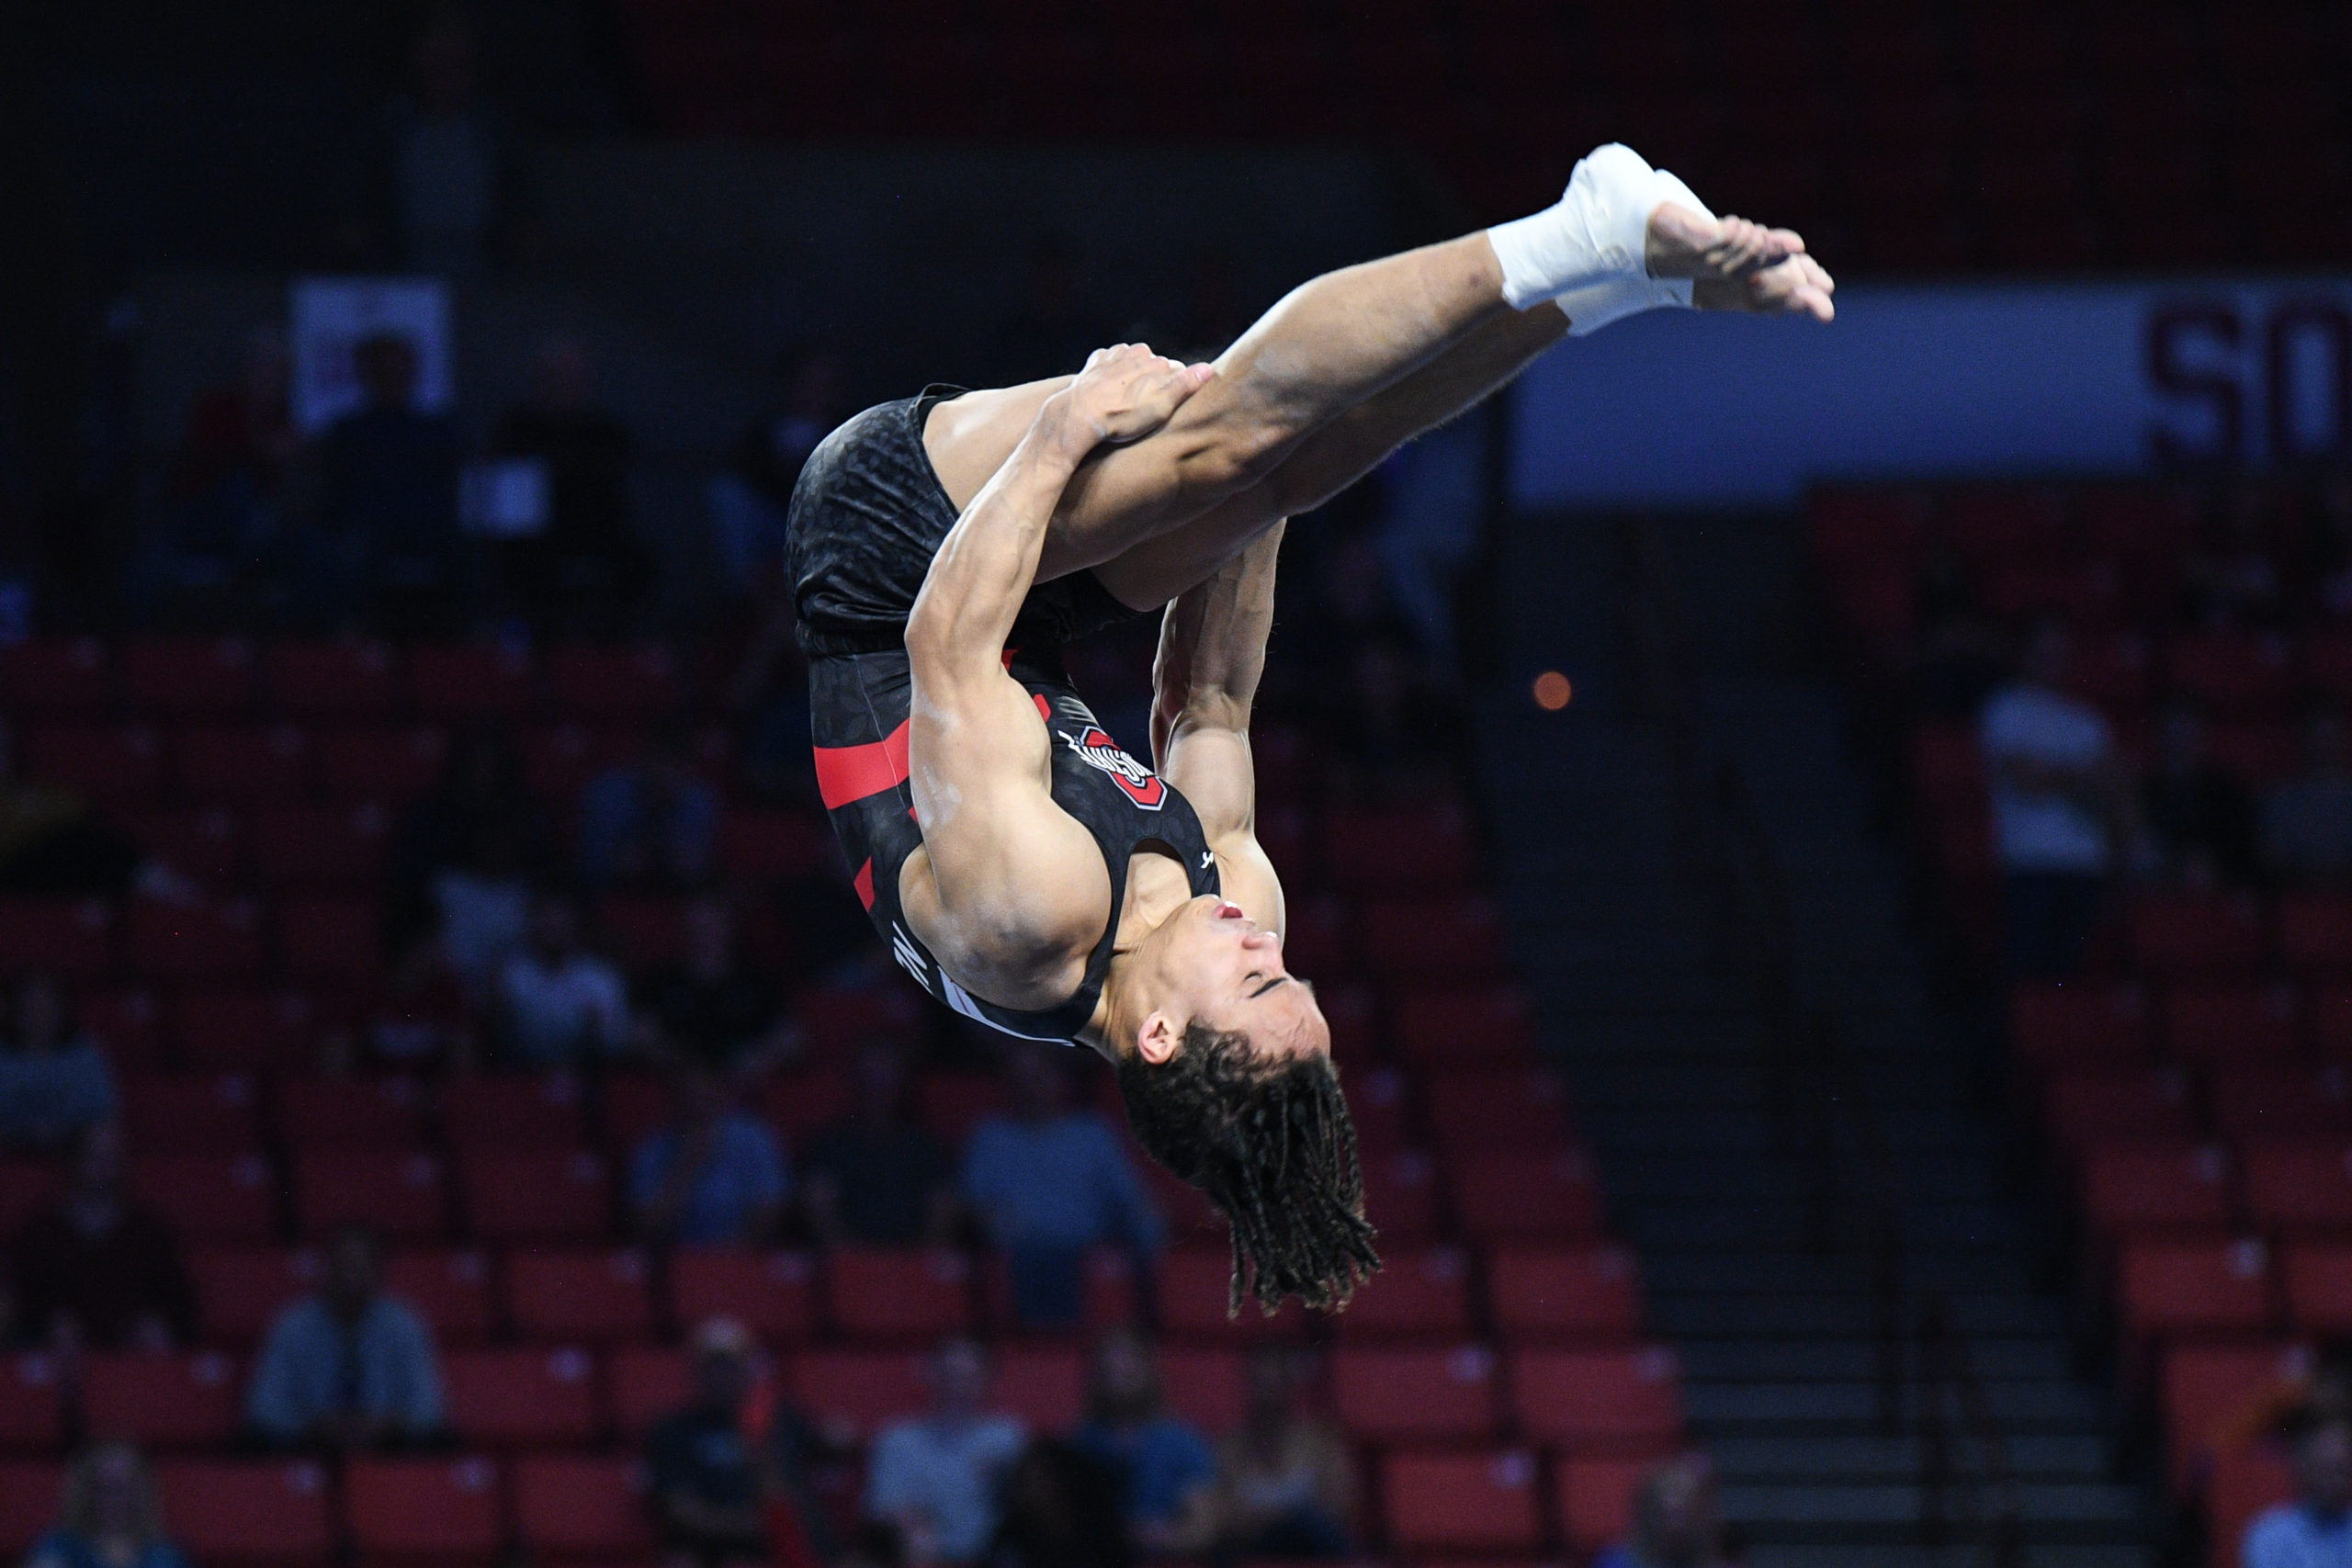 Ohio State's Kameron Nelson competes on floor during the 2022 NCAA Men's Gymnastics Championships.